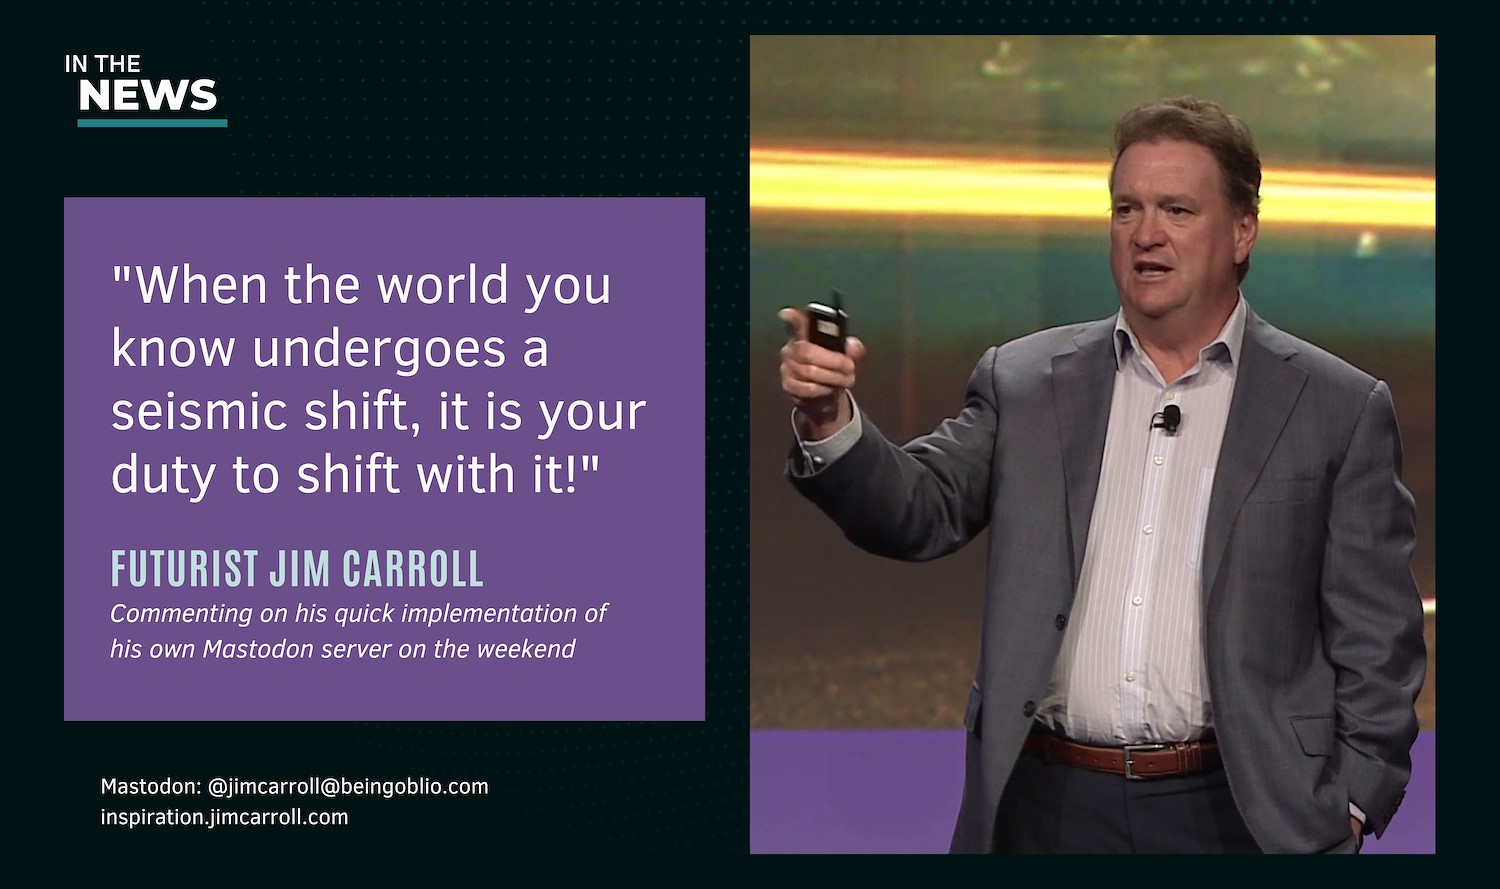 ."When the world you know undergoes a seismic shift, it is your duty to shift with it!" - Futurist Jim Carroll